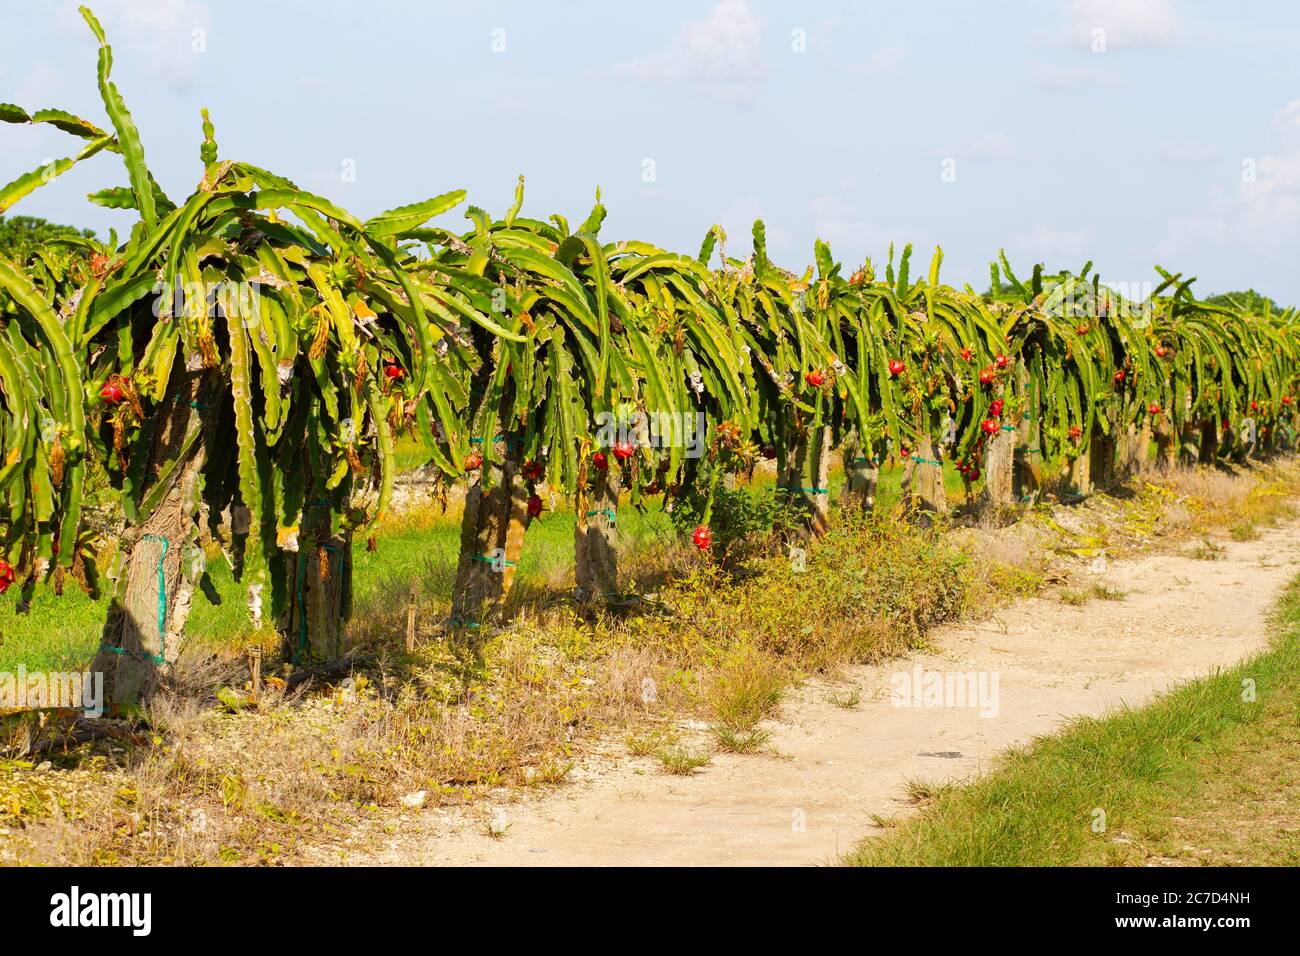 A field of Dragon Fruit  cultivated near Homestead Florida. Dragon fruit grows on cactus plants. Stock Photo